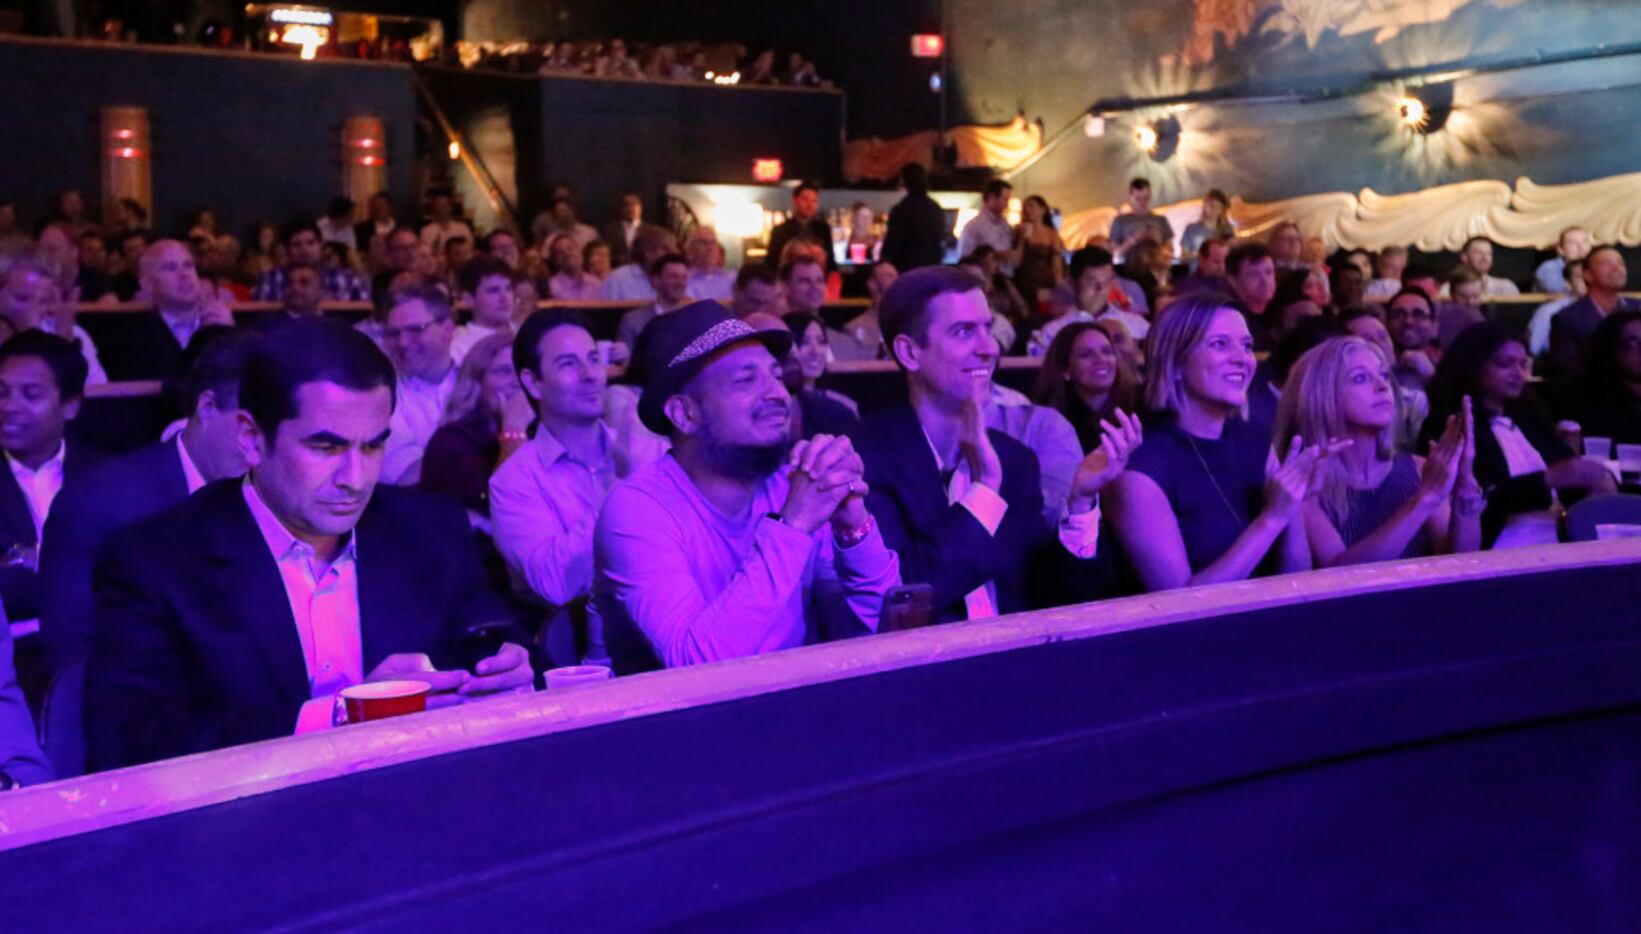 The audience reacts to a rebuttal during one of the "fights" at Digital Fight Club held at...